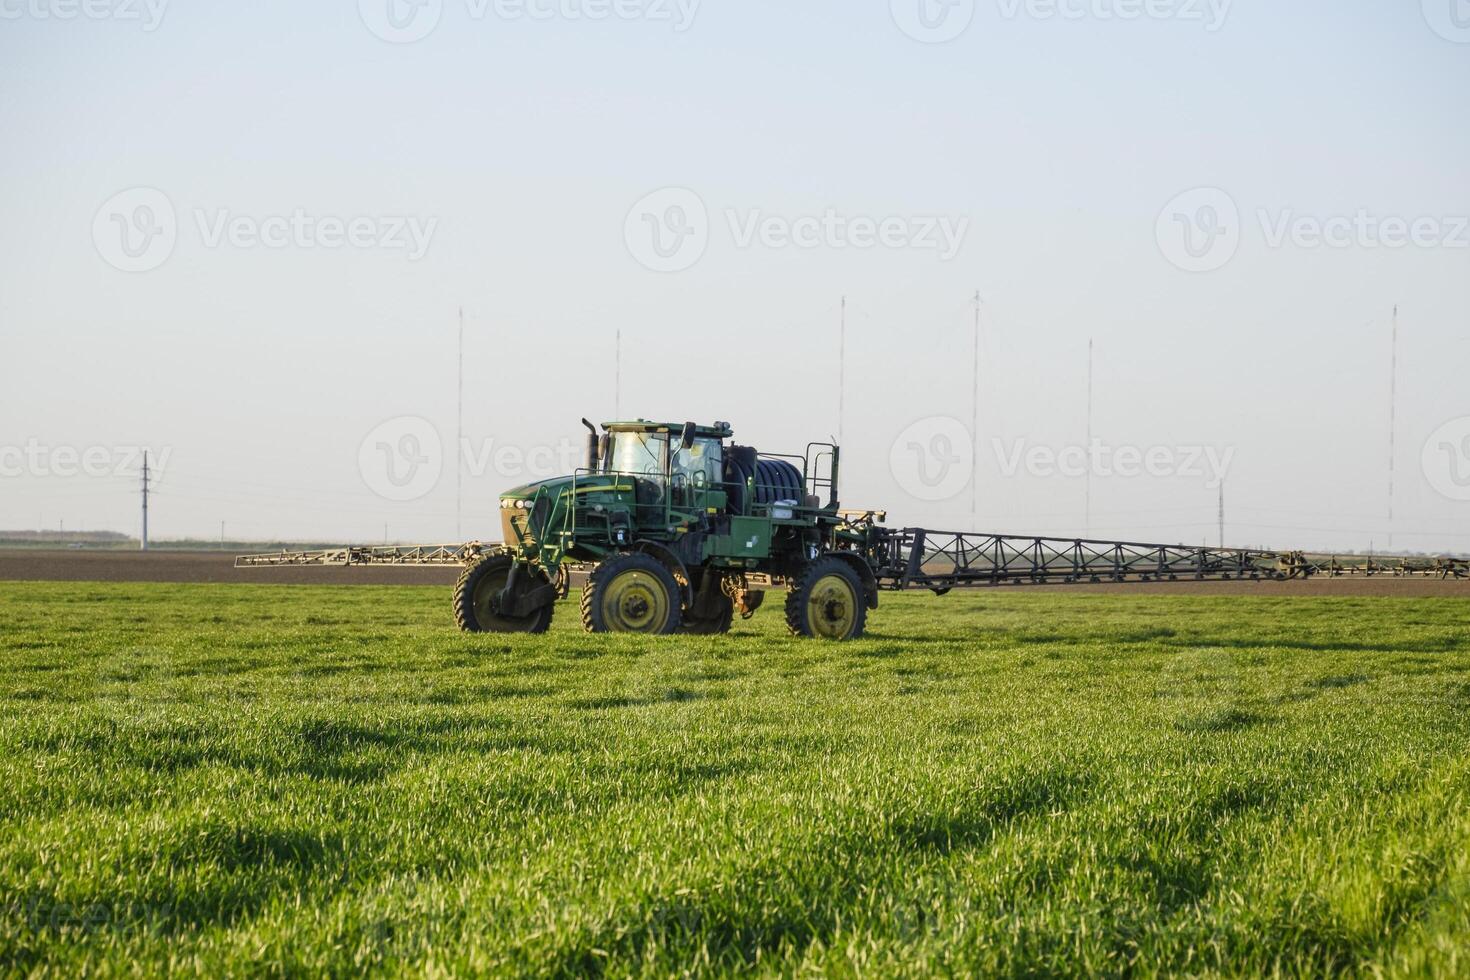 Tractor on the sunset background. Tractor with high wheels is making fertilizer on young wheat. The use of finely dispersed spray chemicals photo